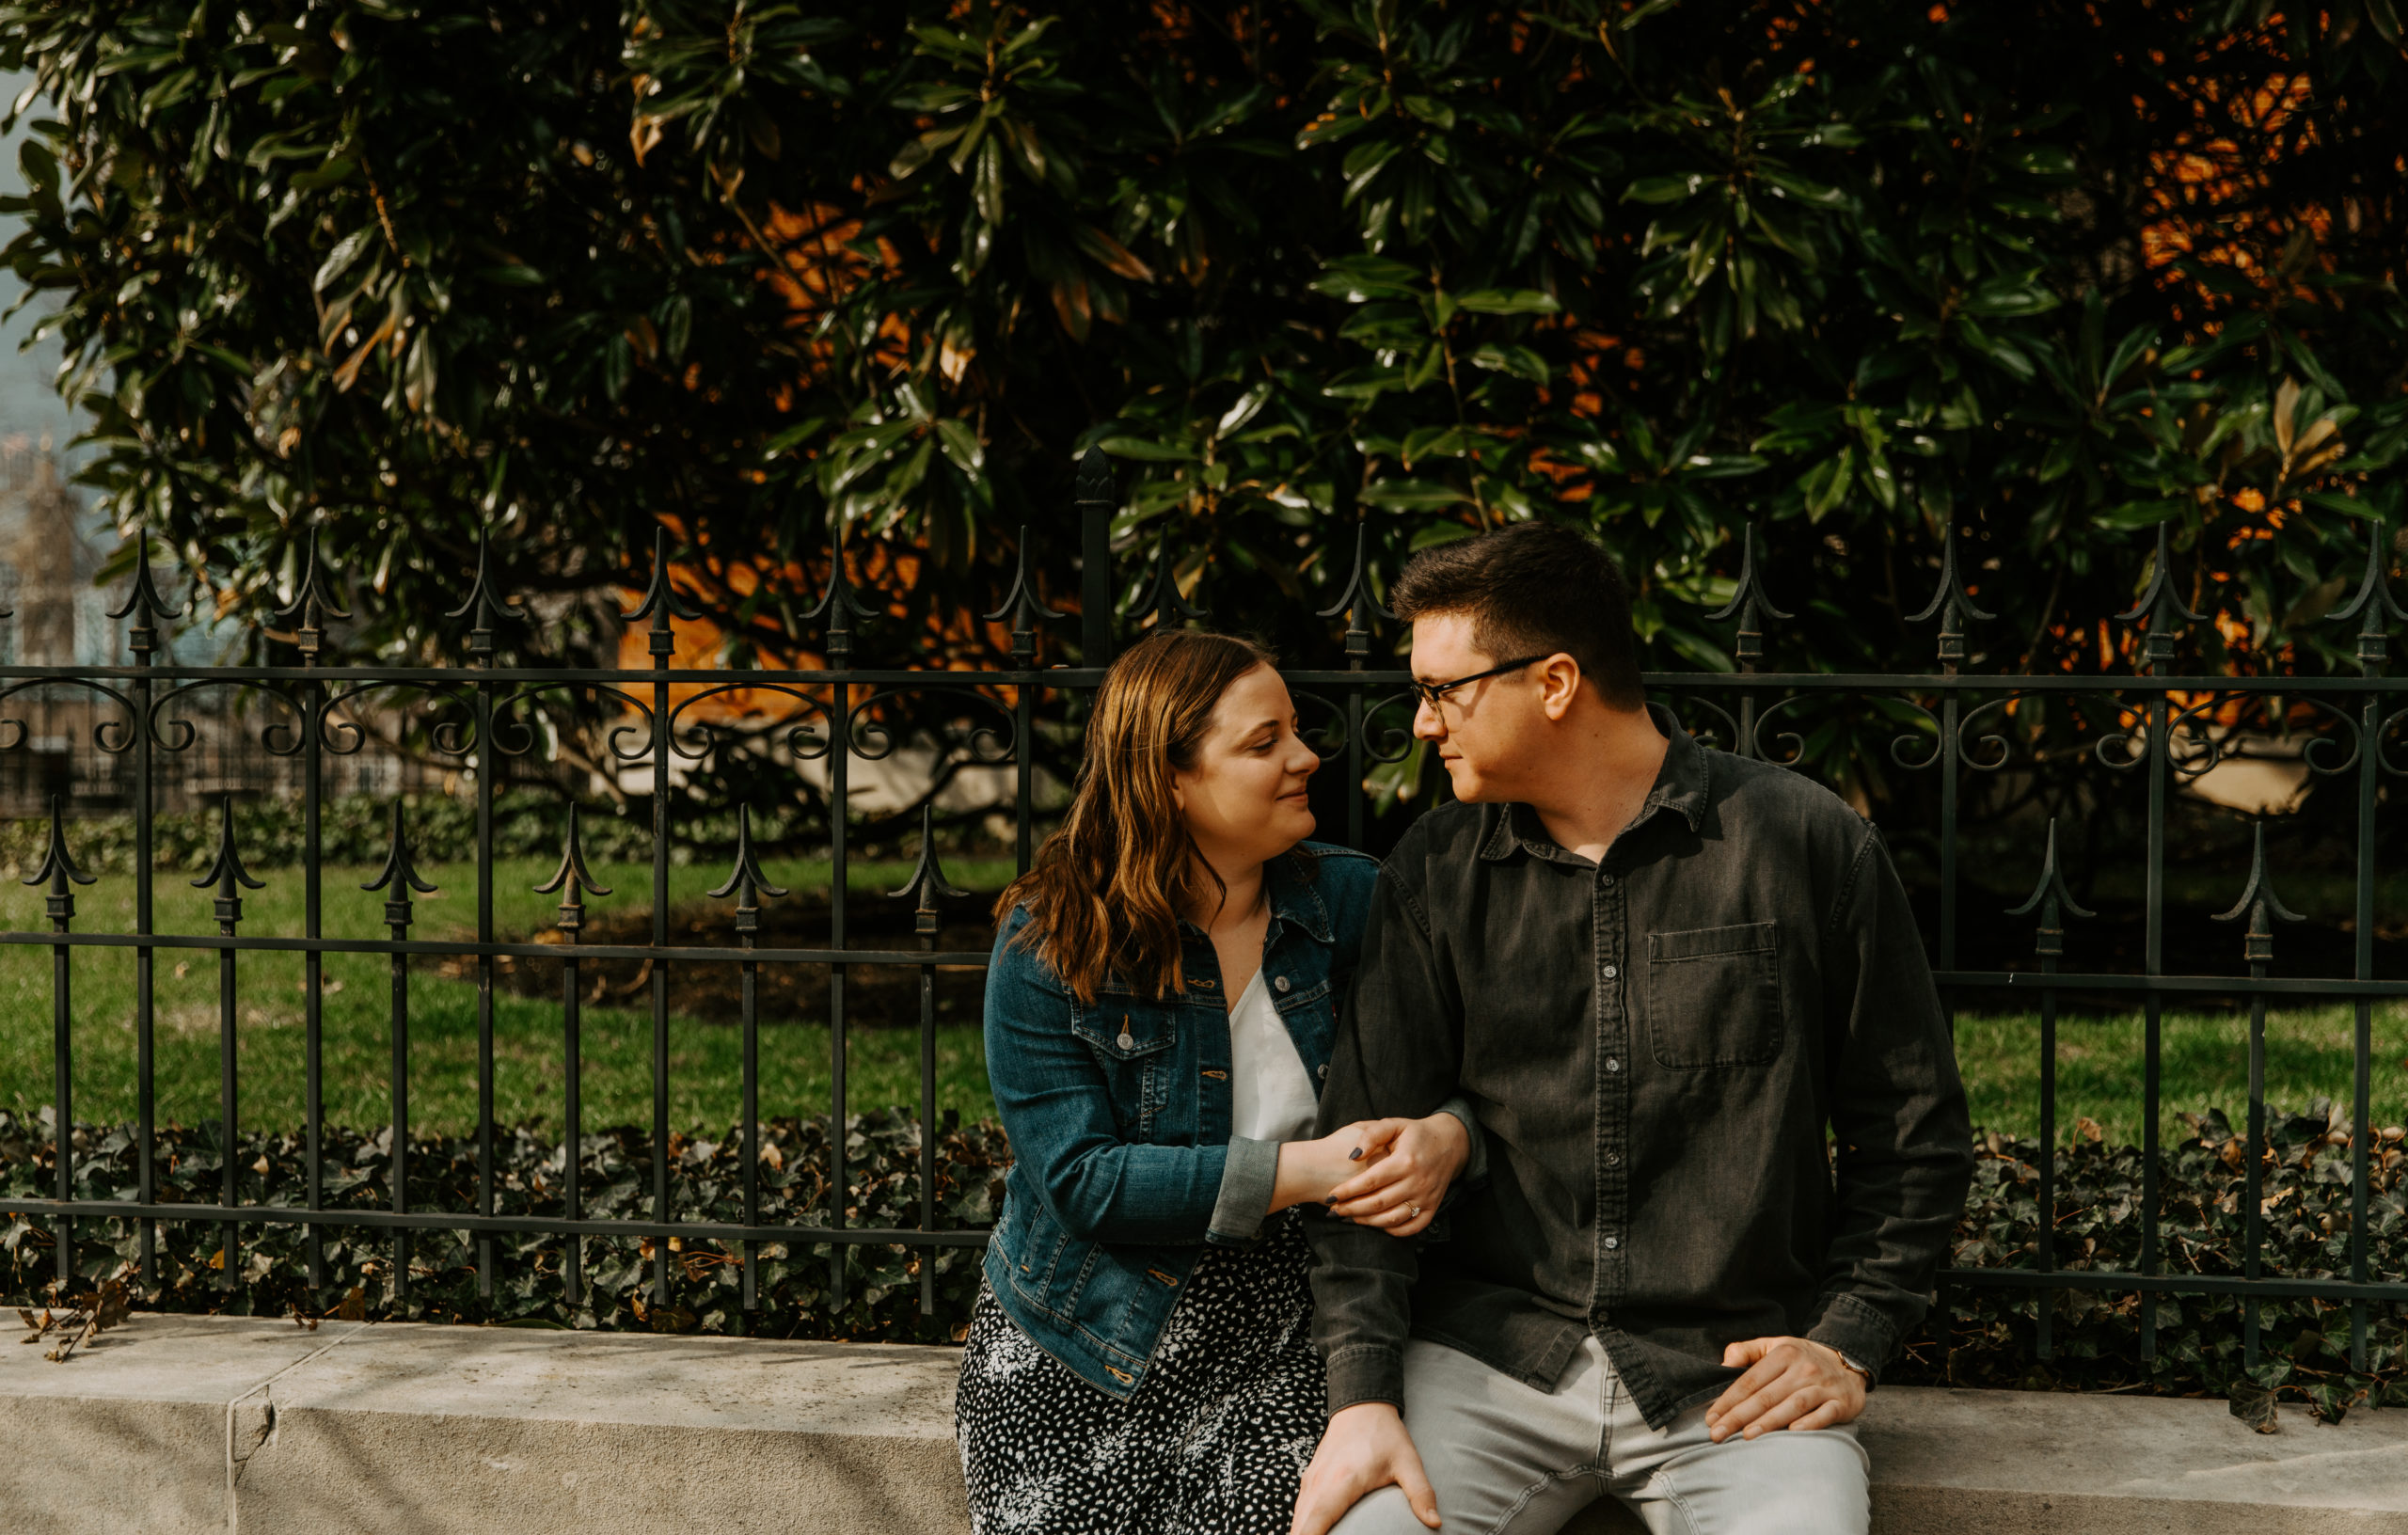 Moody Covington Kentucky Engagement Session in front of Magnolia Tree